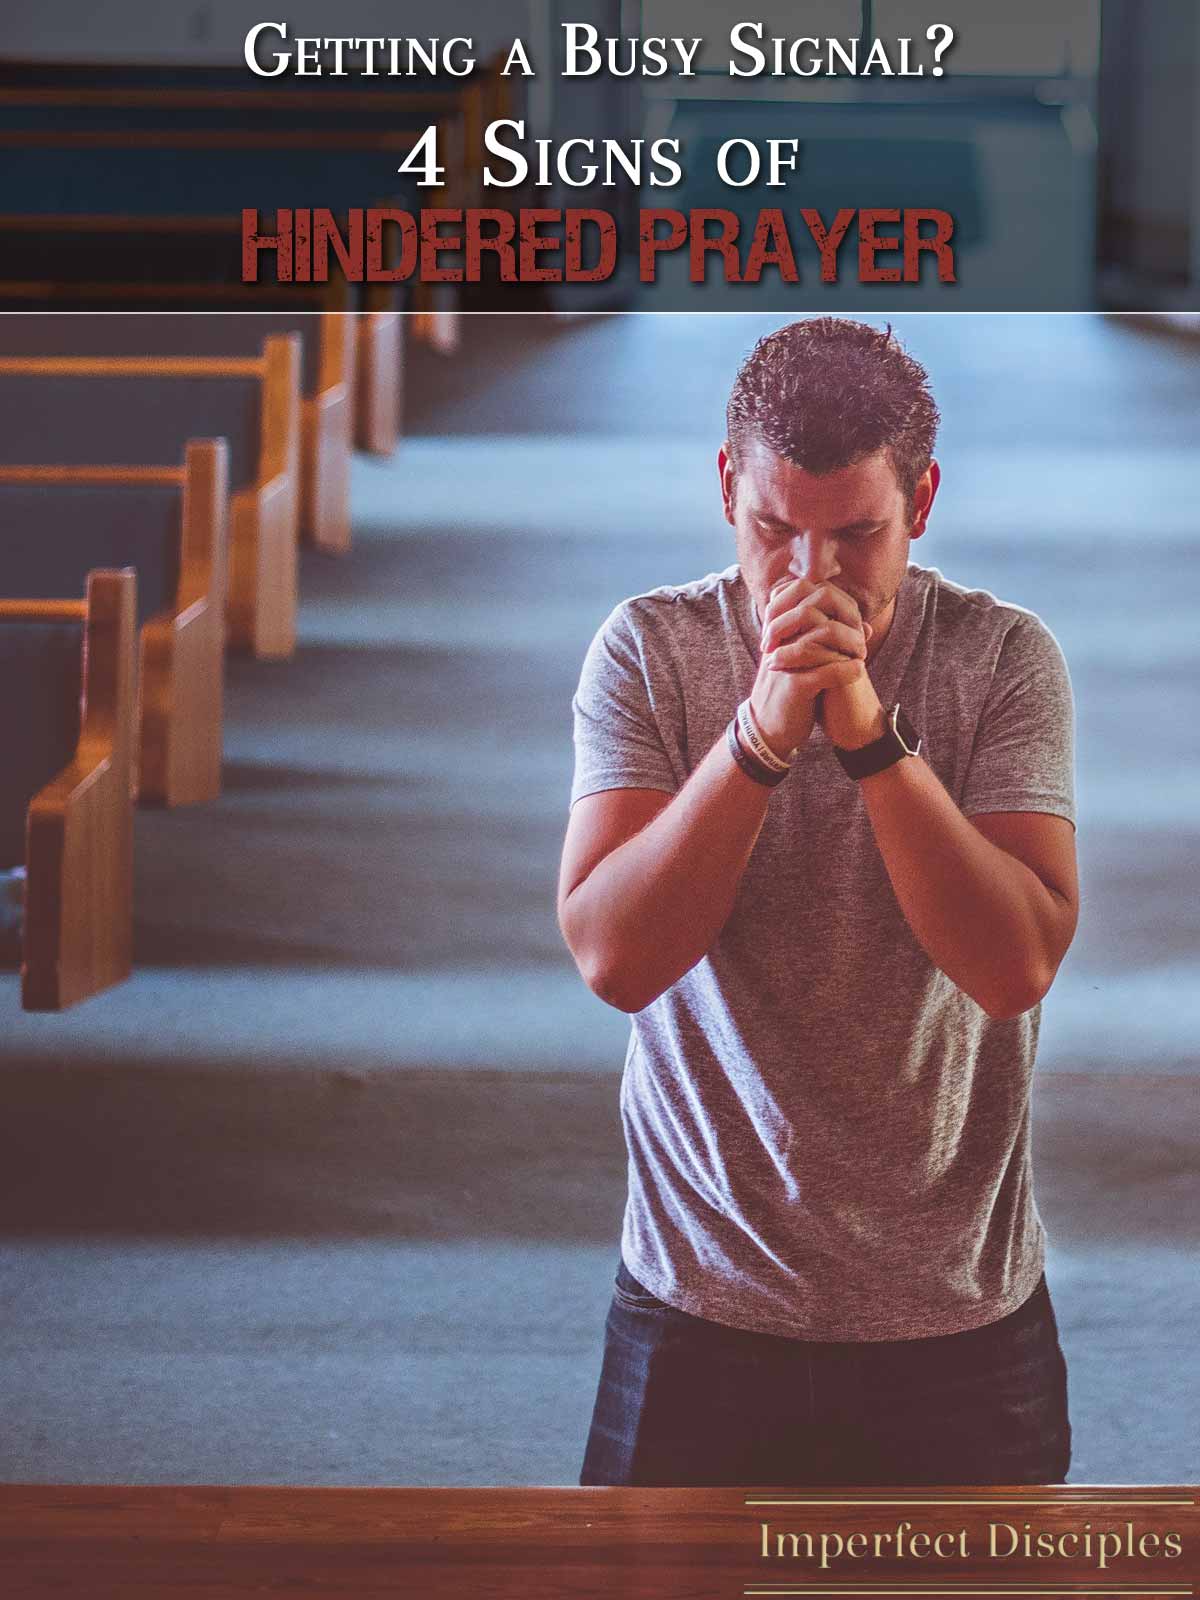 Getting a Busy Signal? 4 Signs of Hindered Prayer